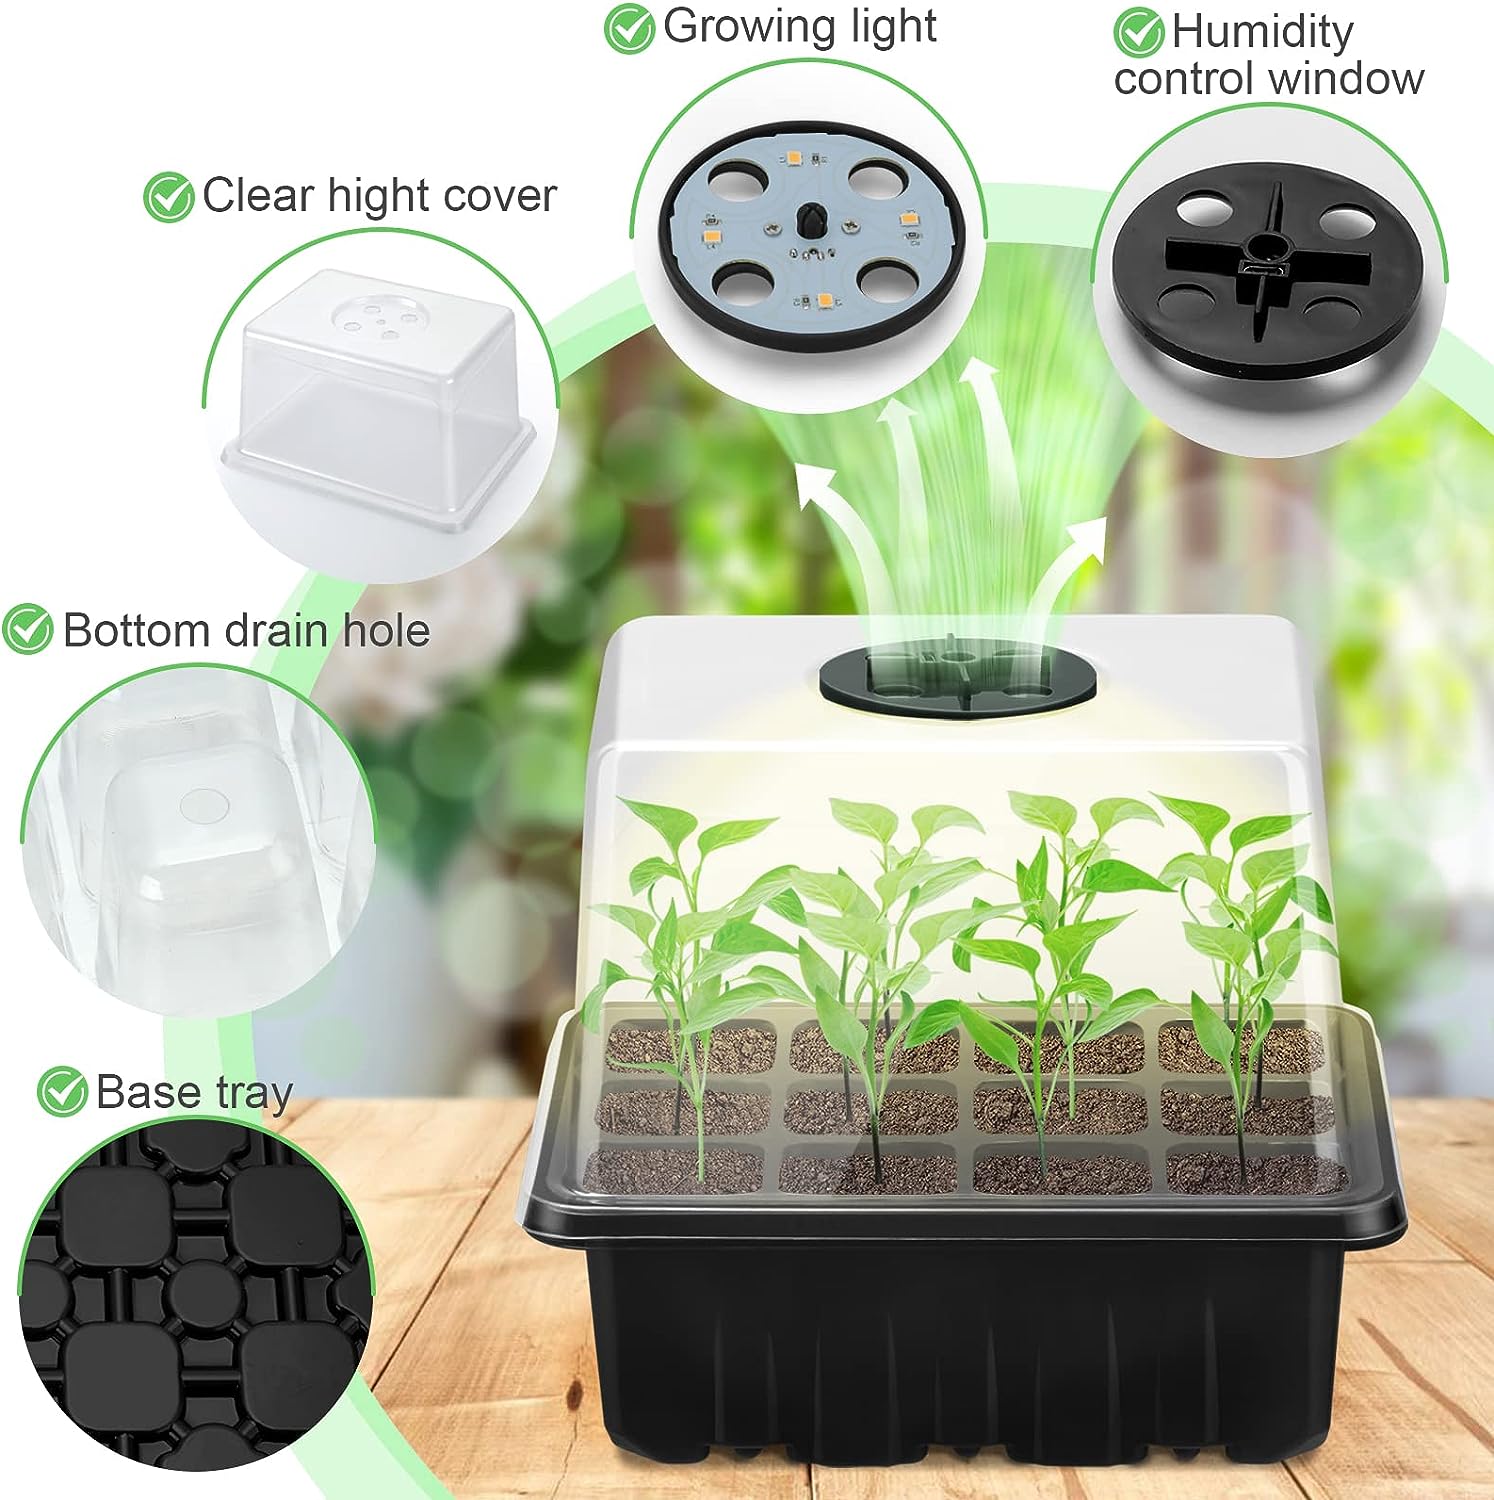 Lunies 6 Packs Seed Starter Trays with Grow Light, Seeding Starter Tray with Adjustable Humidity Dome, Base Indoor Greenhouse Germination Kit for Seed Growing Starting(12 Cells per Tray, Black)